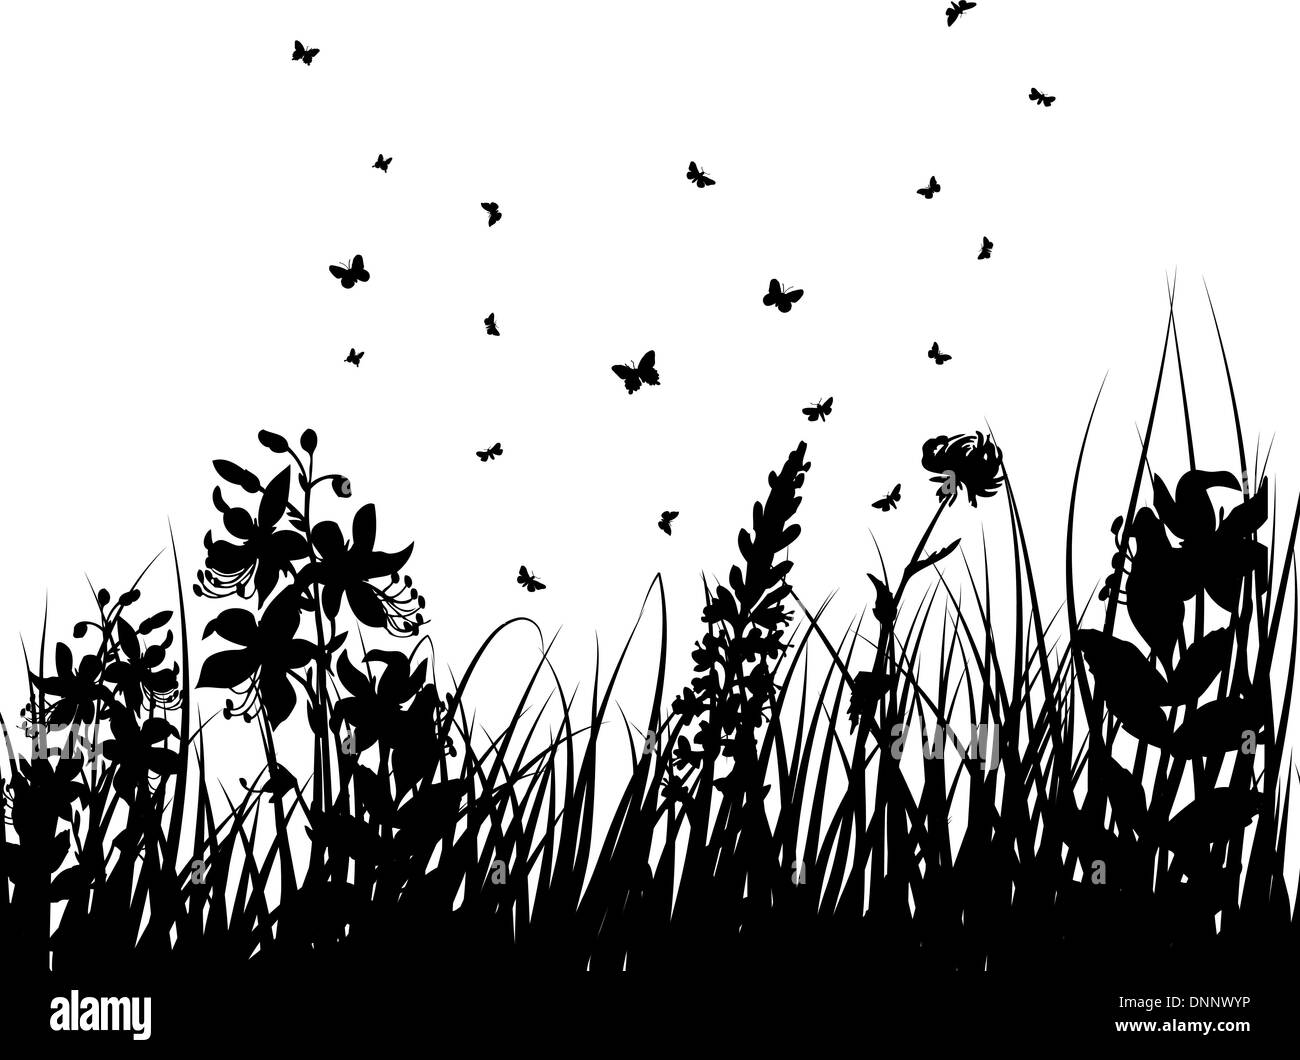 Vector grass silhouettes backgrounds with insects Stock Vector Image ...